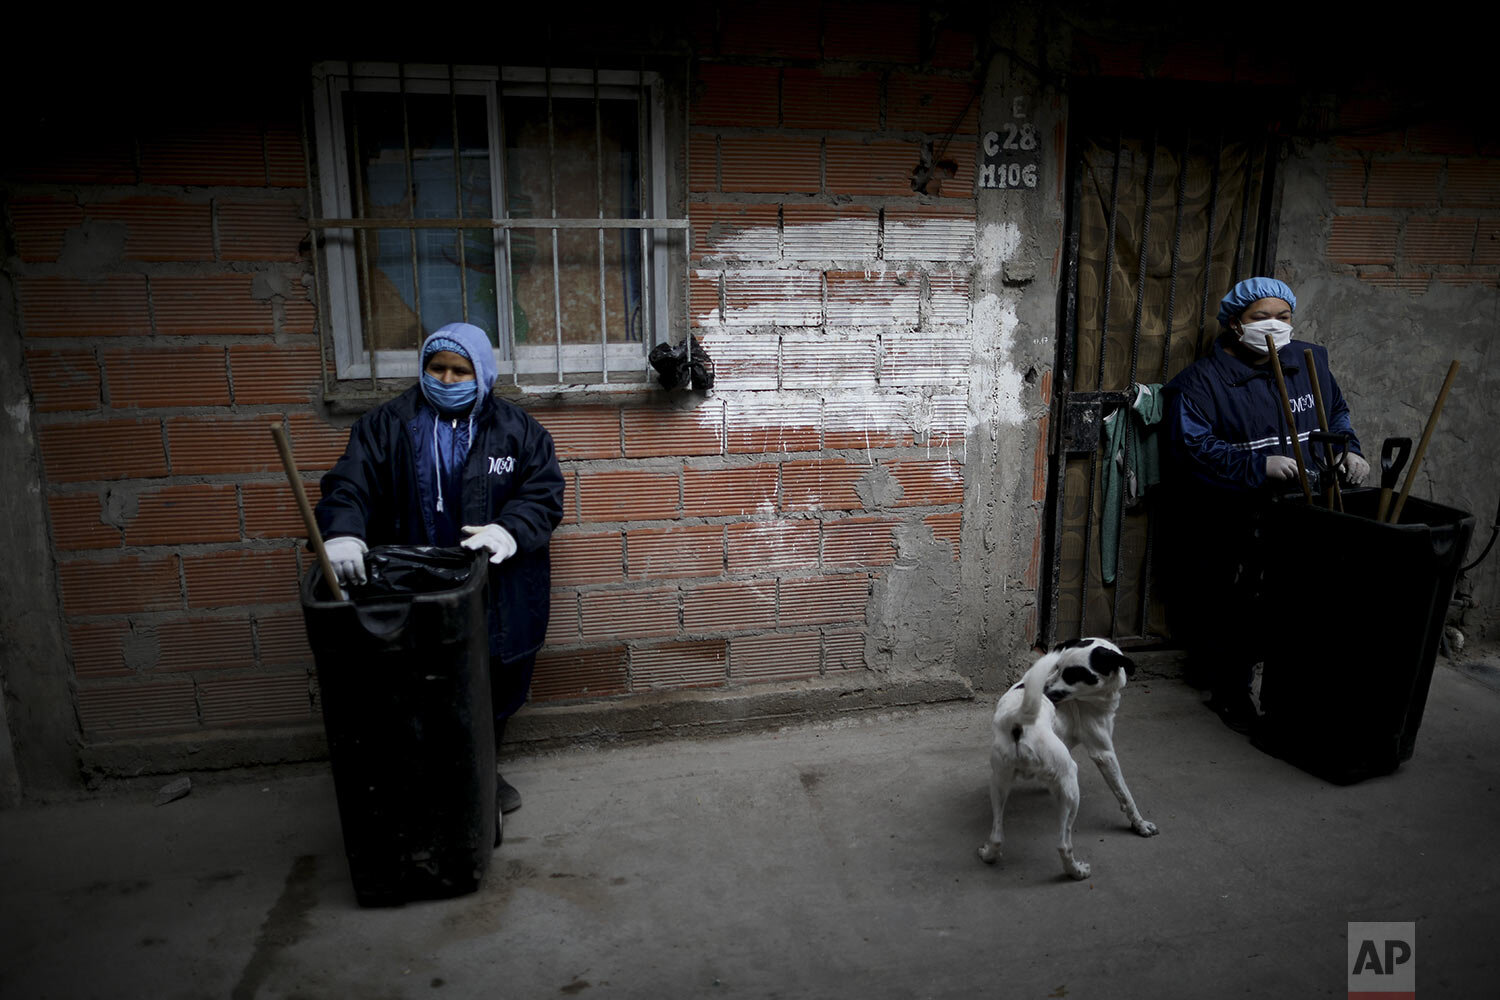  Trash workers wearing face masks, gloves and head gear, rest as they work in “Villa 31” in Buenos Aires, Argentina, Tuesday, May 5, 2020. (AP Photo/Natacha Pisarenko) 